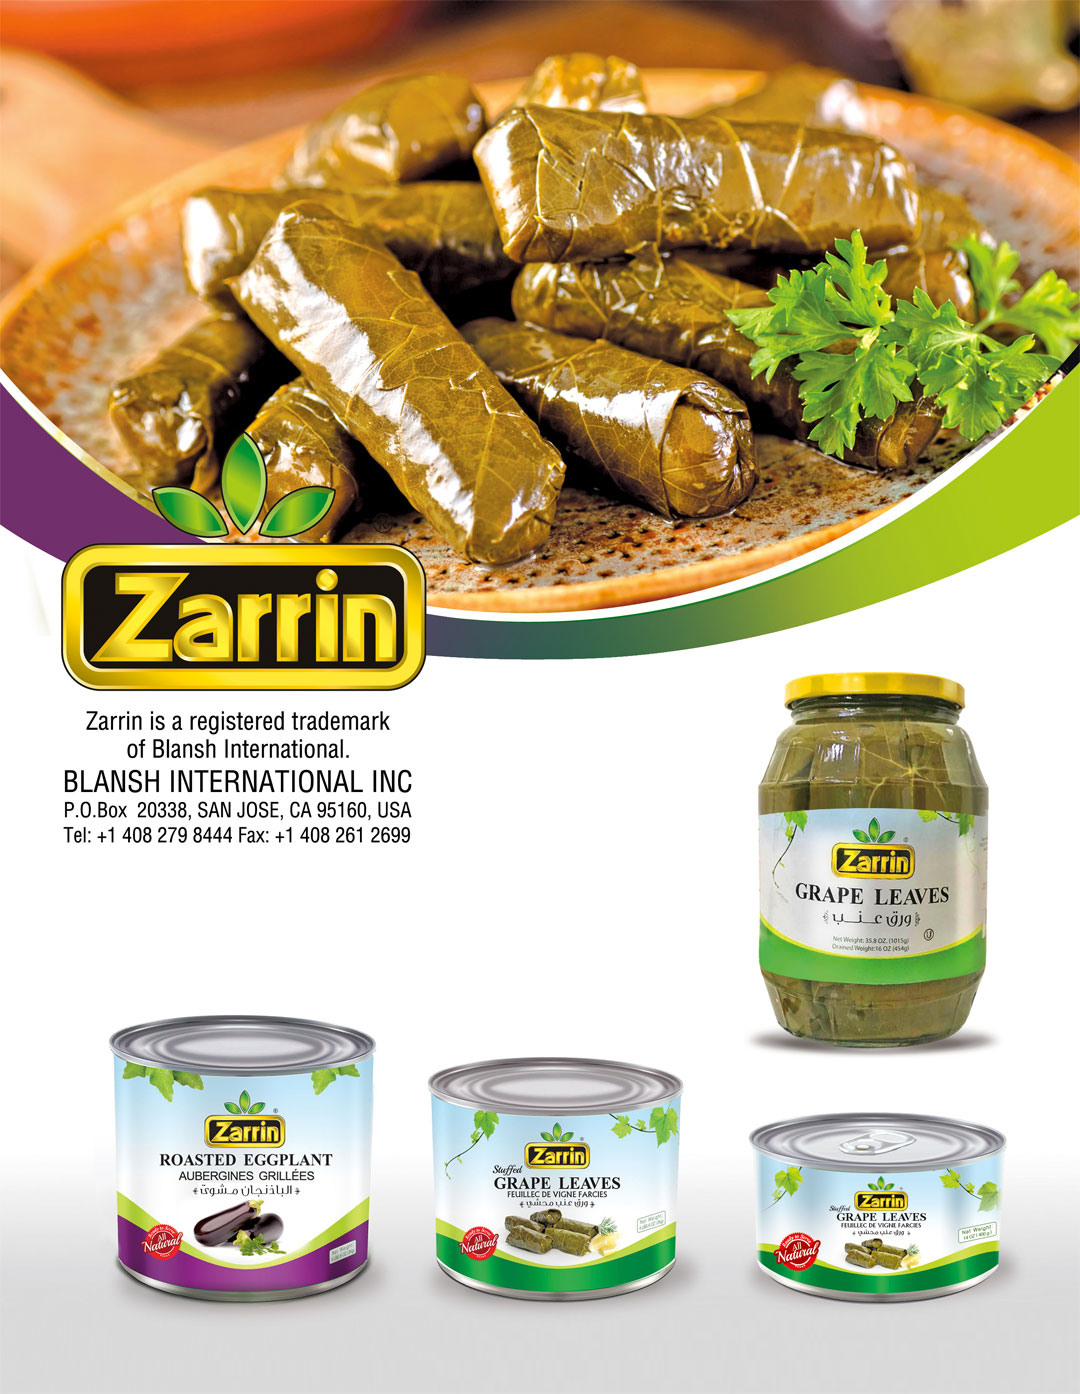 Great grape leaves and eggplant pure from your favorite Middle Eastern food distributors, Zarrin.